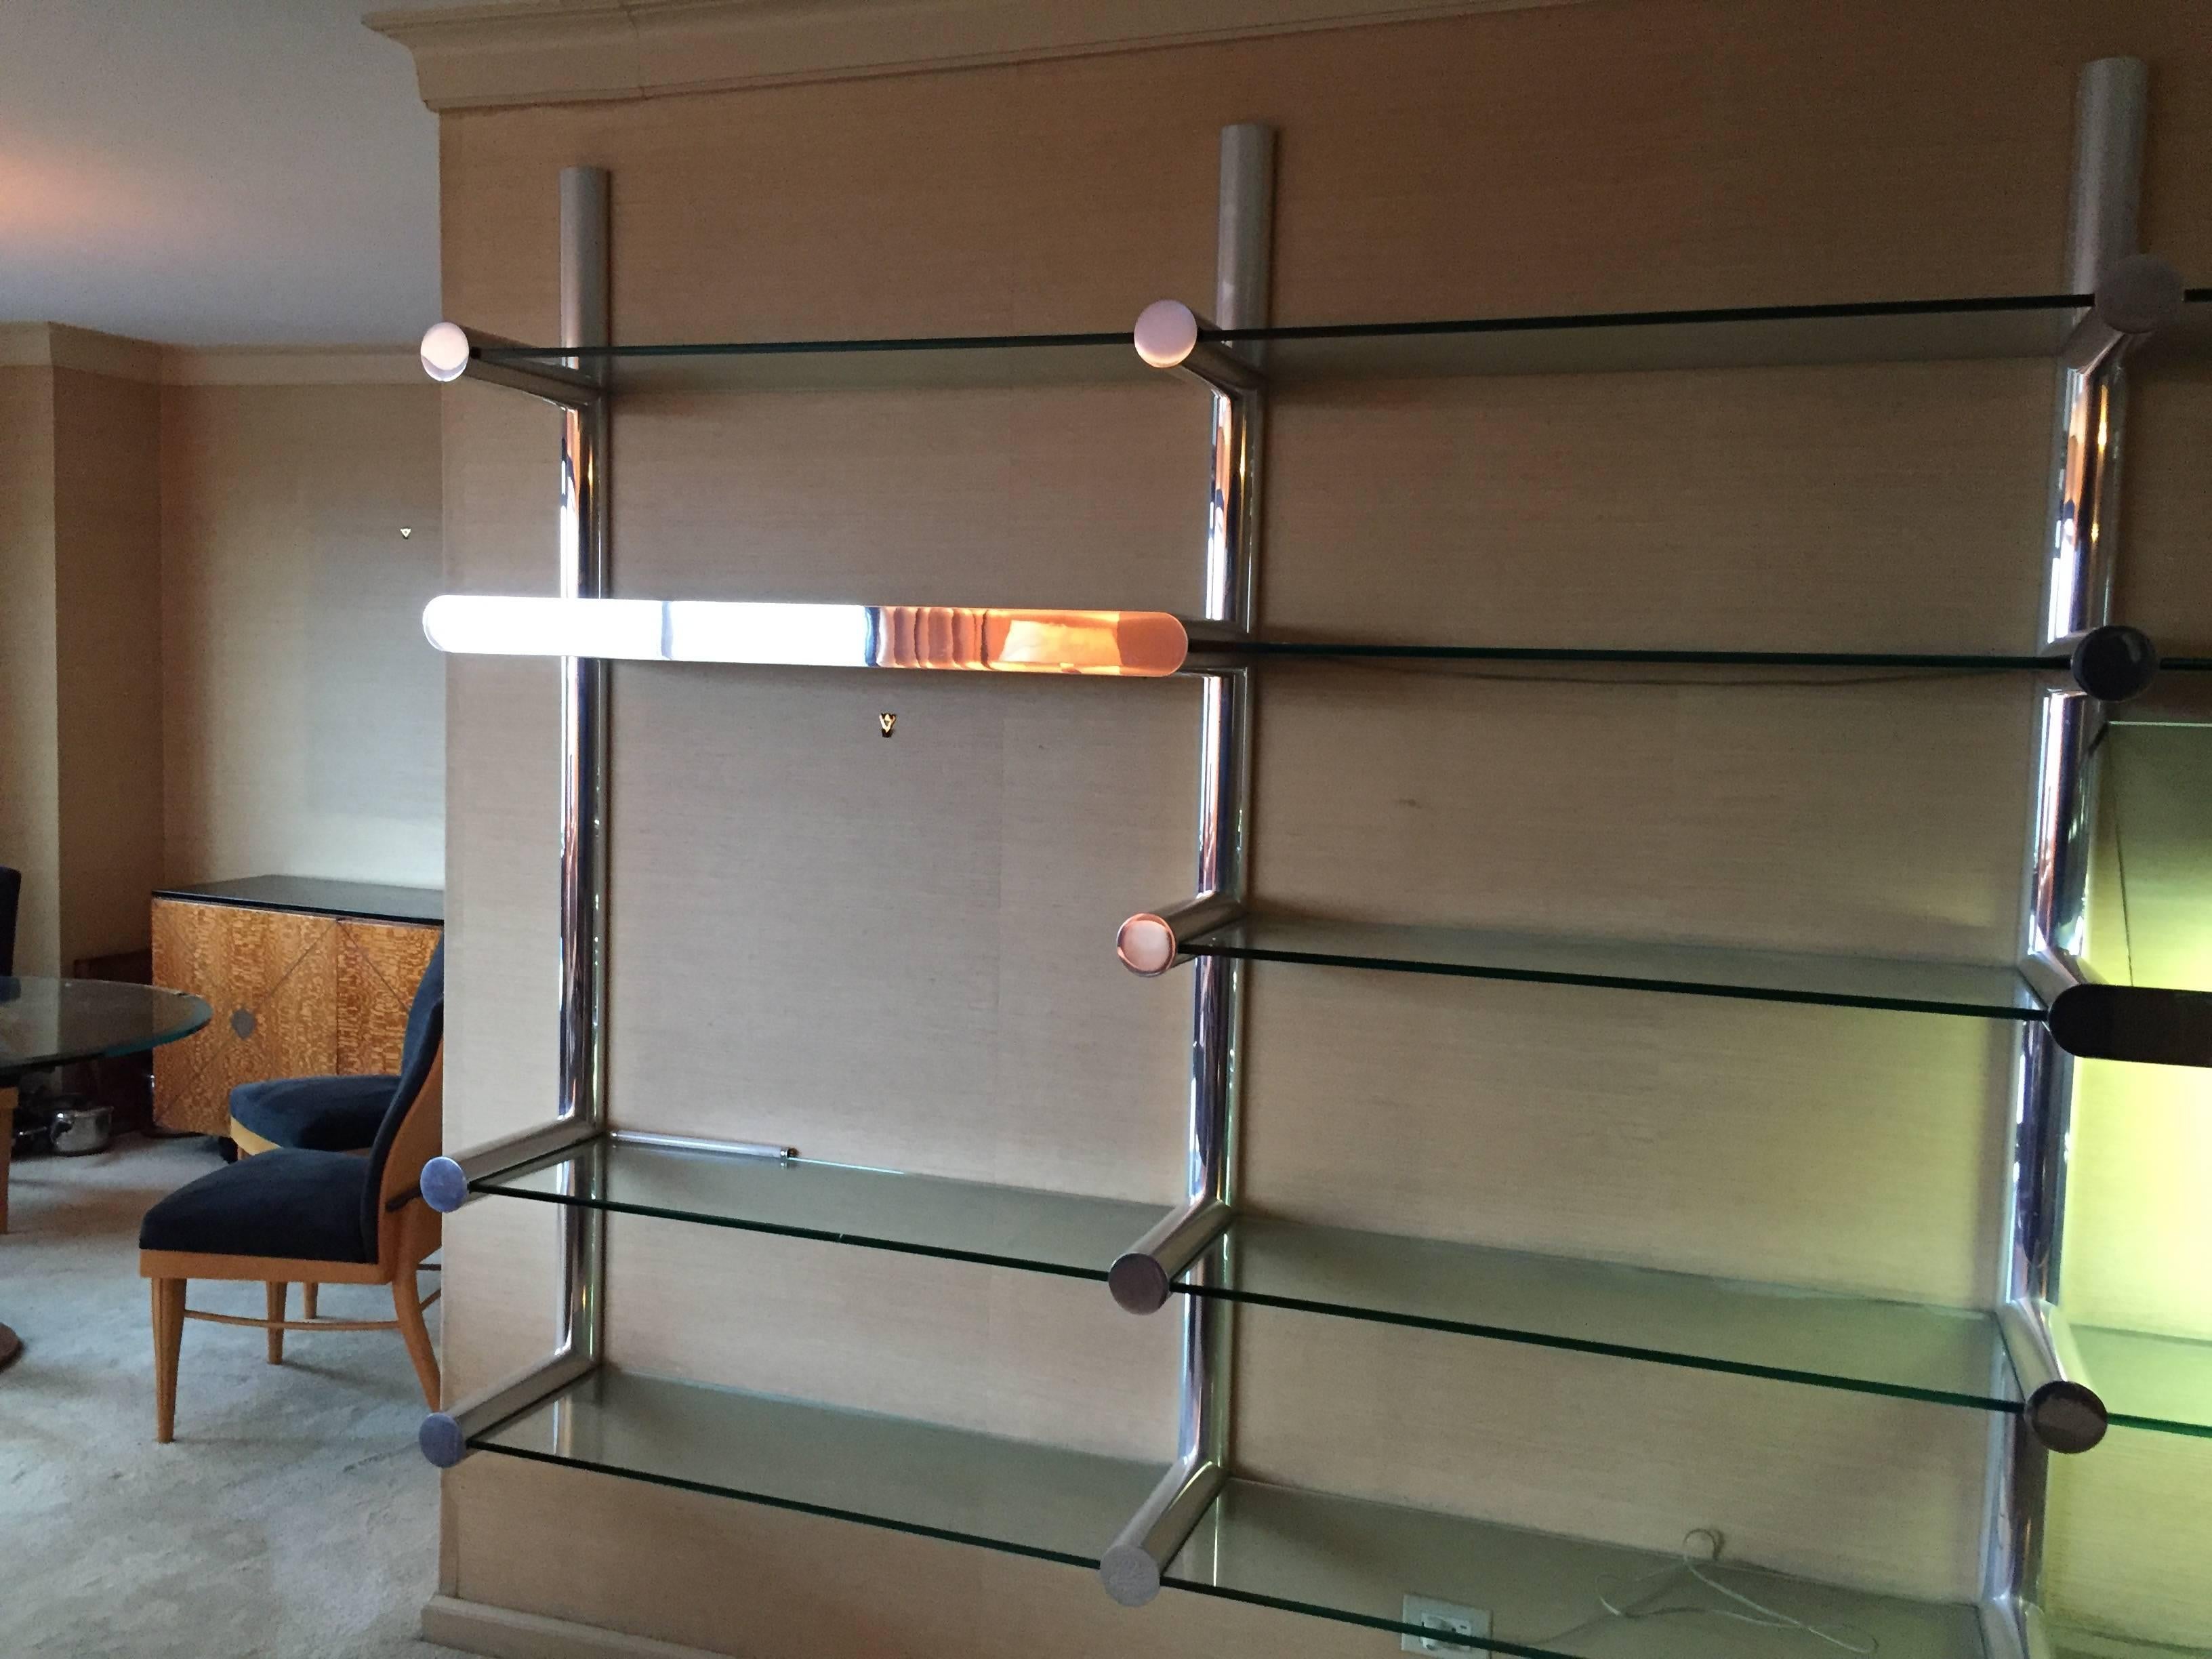 Orba Wall System designed by Janet Schwietzer for the Pace Collection, NY. This system consists of 3 bays with 14 glass shelves held in place by four vertical wall mounted uprights and includes 2 lighted units all constructed and finished in